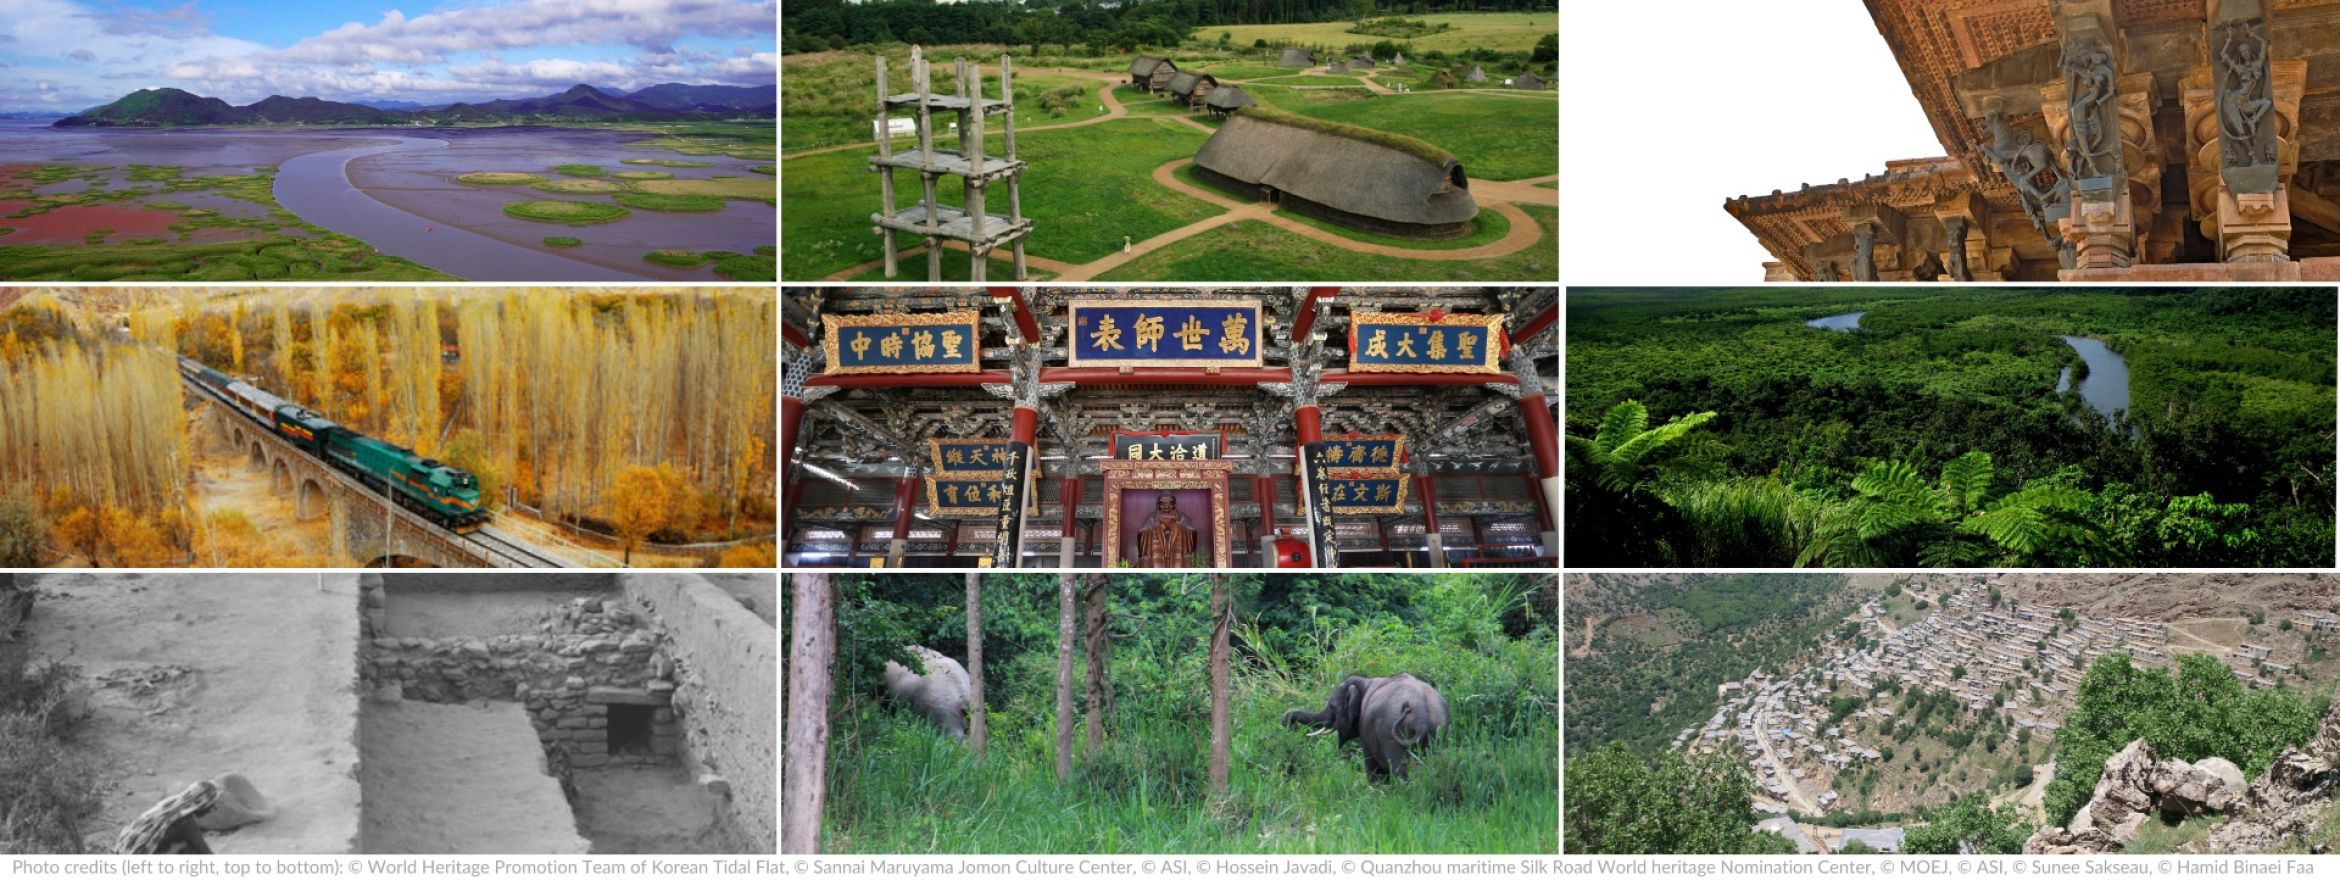 UNESCO World Heritage Committee inscribes 9 new sites in Asia-Pacific